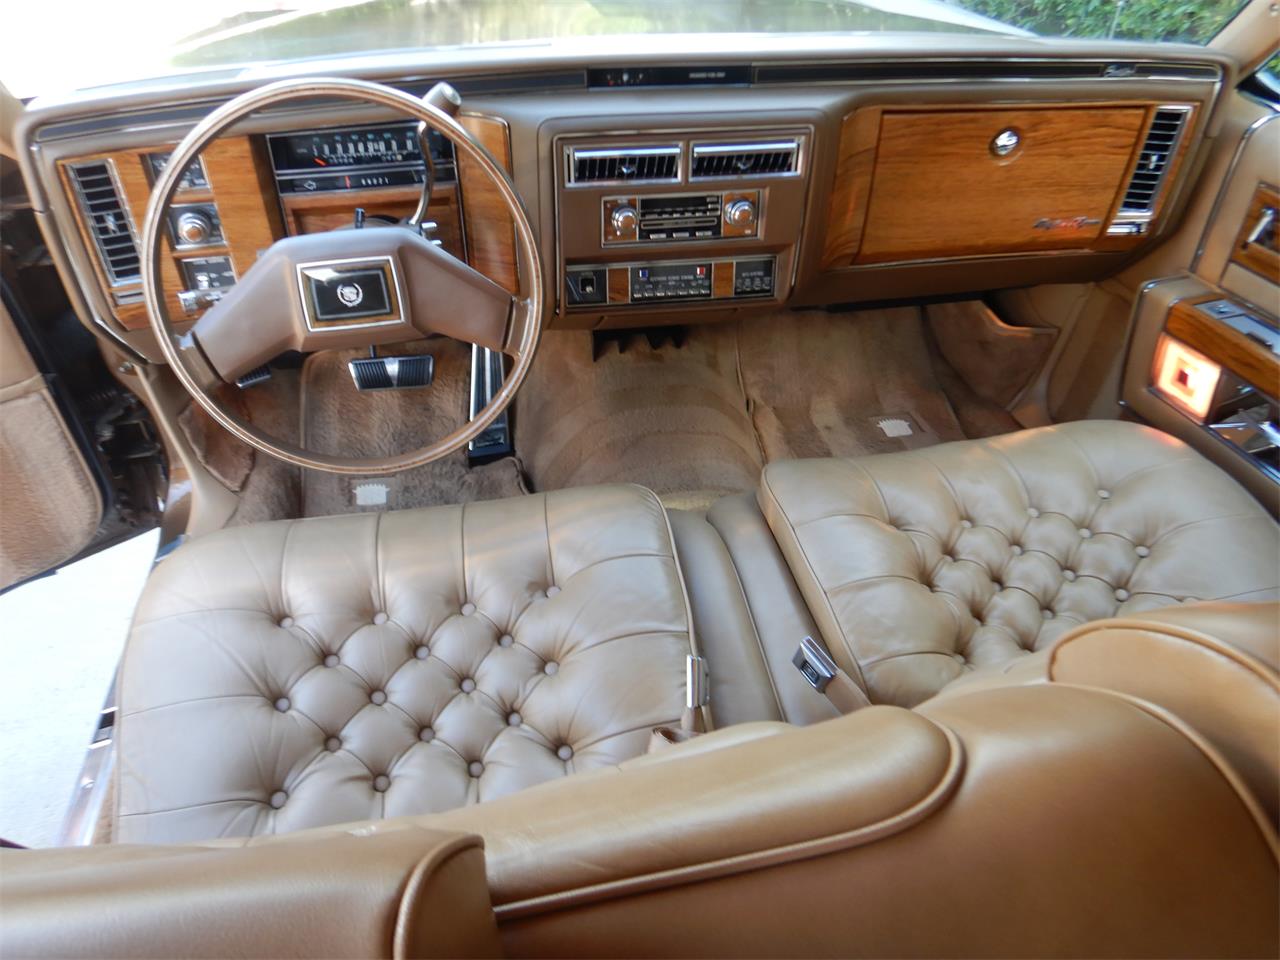 1981 Cadillac Fleetwood Brougham for sale in Woodland Hills, CA – photo 62